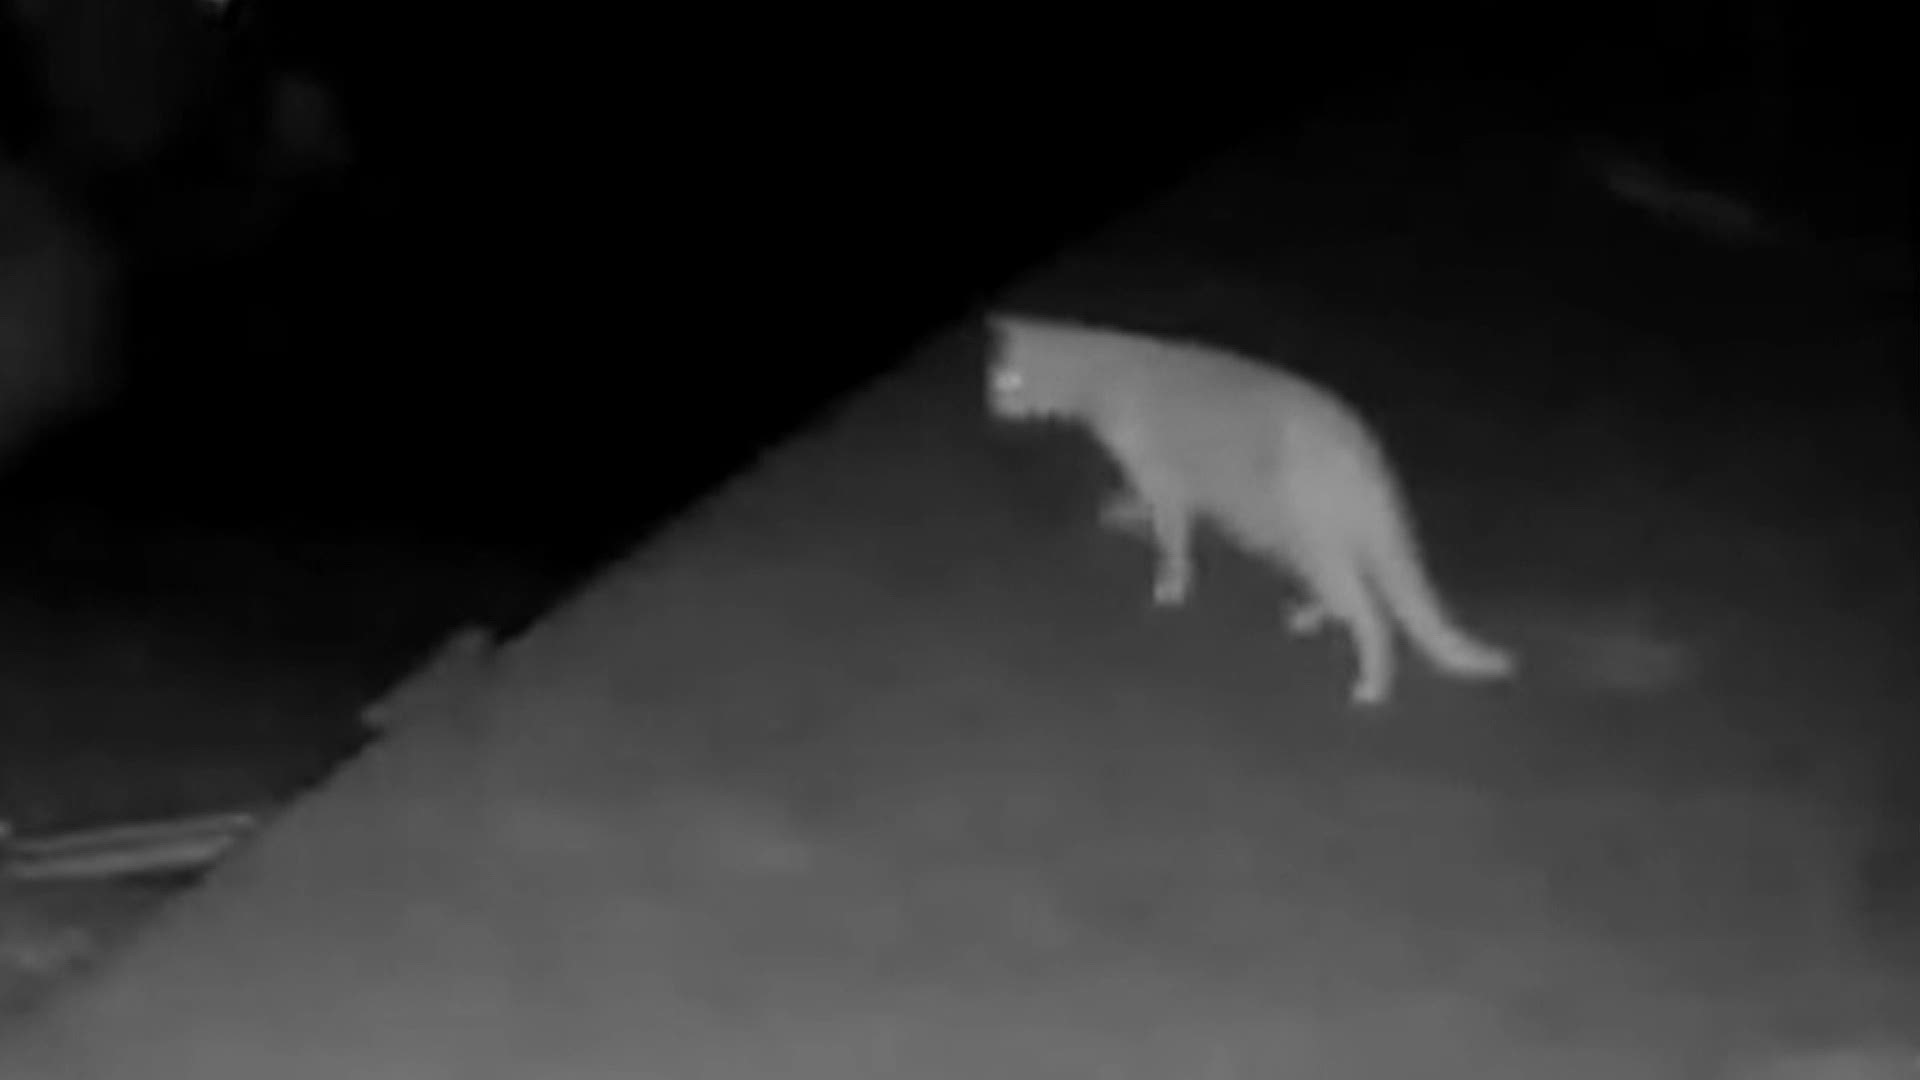 A Mercer Island homeowner captured surveillance footage of a cougar walking along a driveway on Oct. 12, 2019.